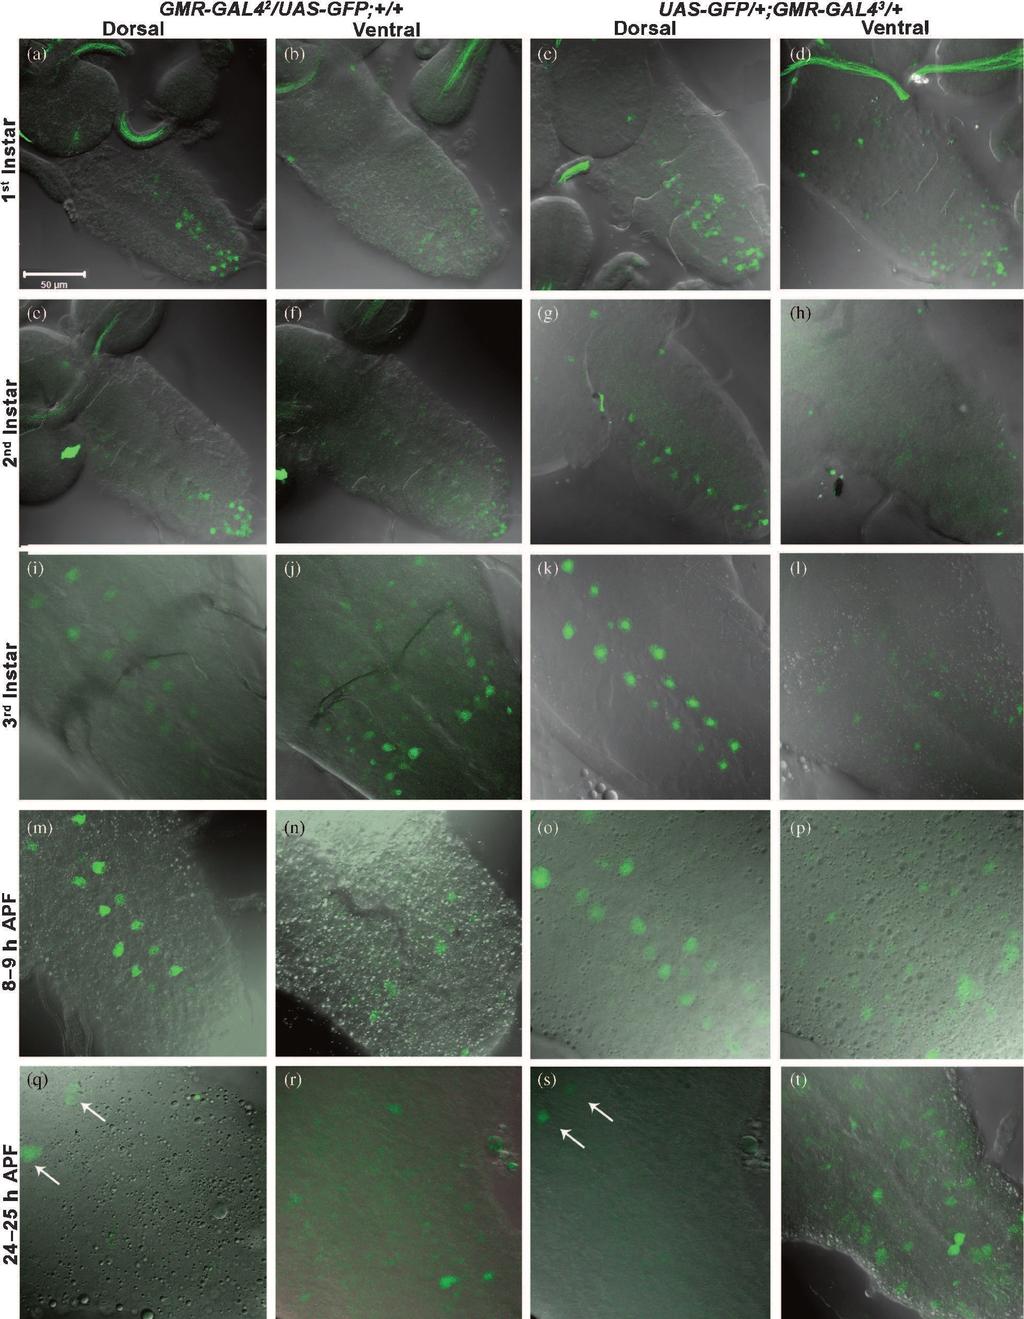 Expression domains of Drosophila sev-gal4 and GMR-GAL4 drivers Figure 6. GMR-GAL4 drivers activate UAS-GFP in larval and pupal ventral ganglia in a pattern similar to that seen in sev-gal4 driver.